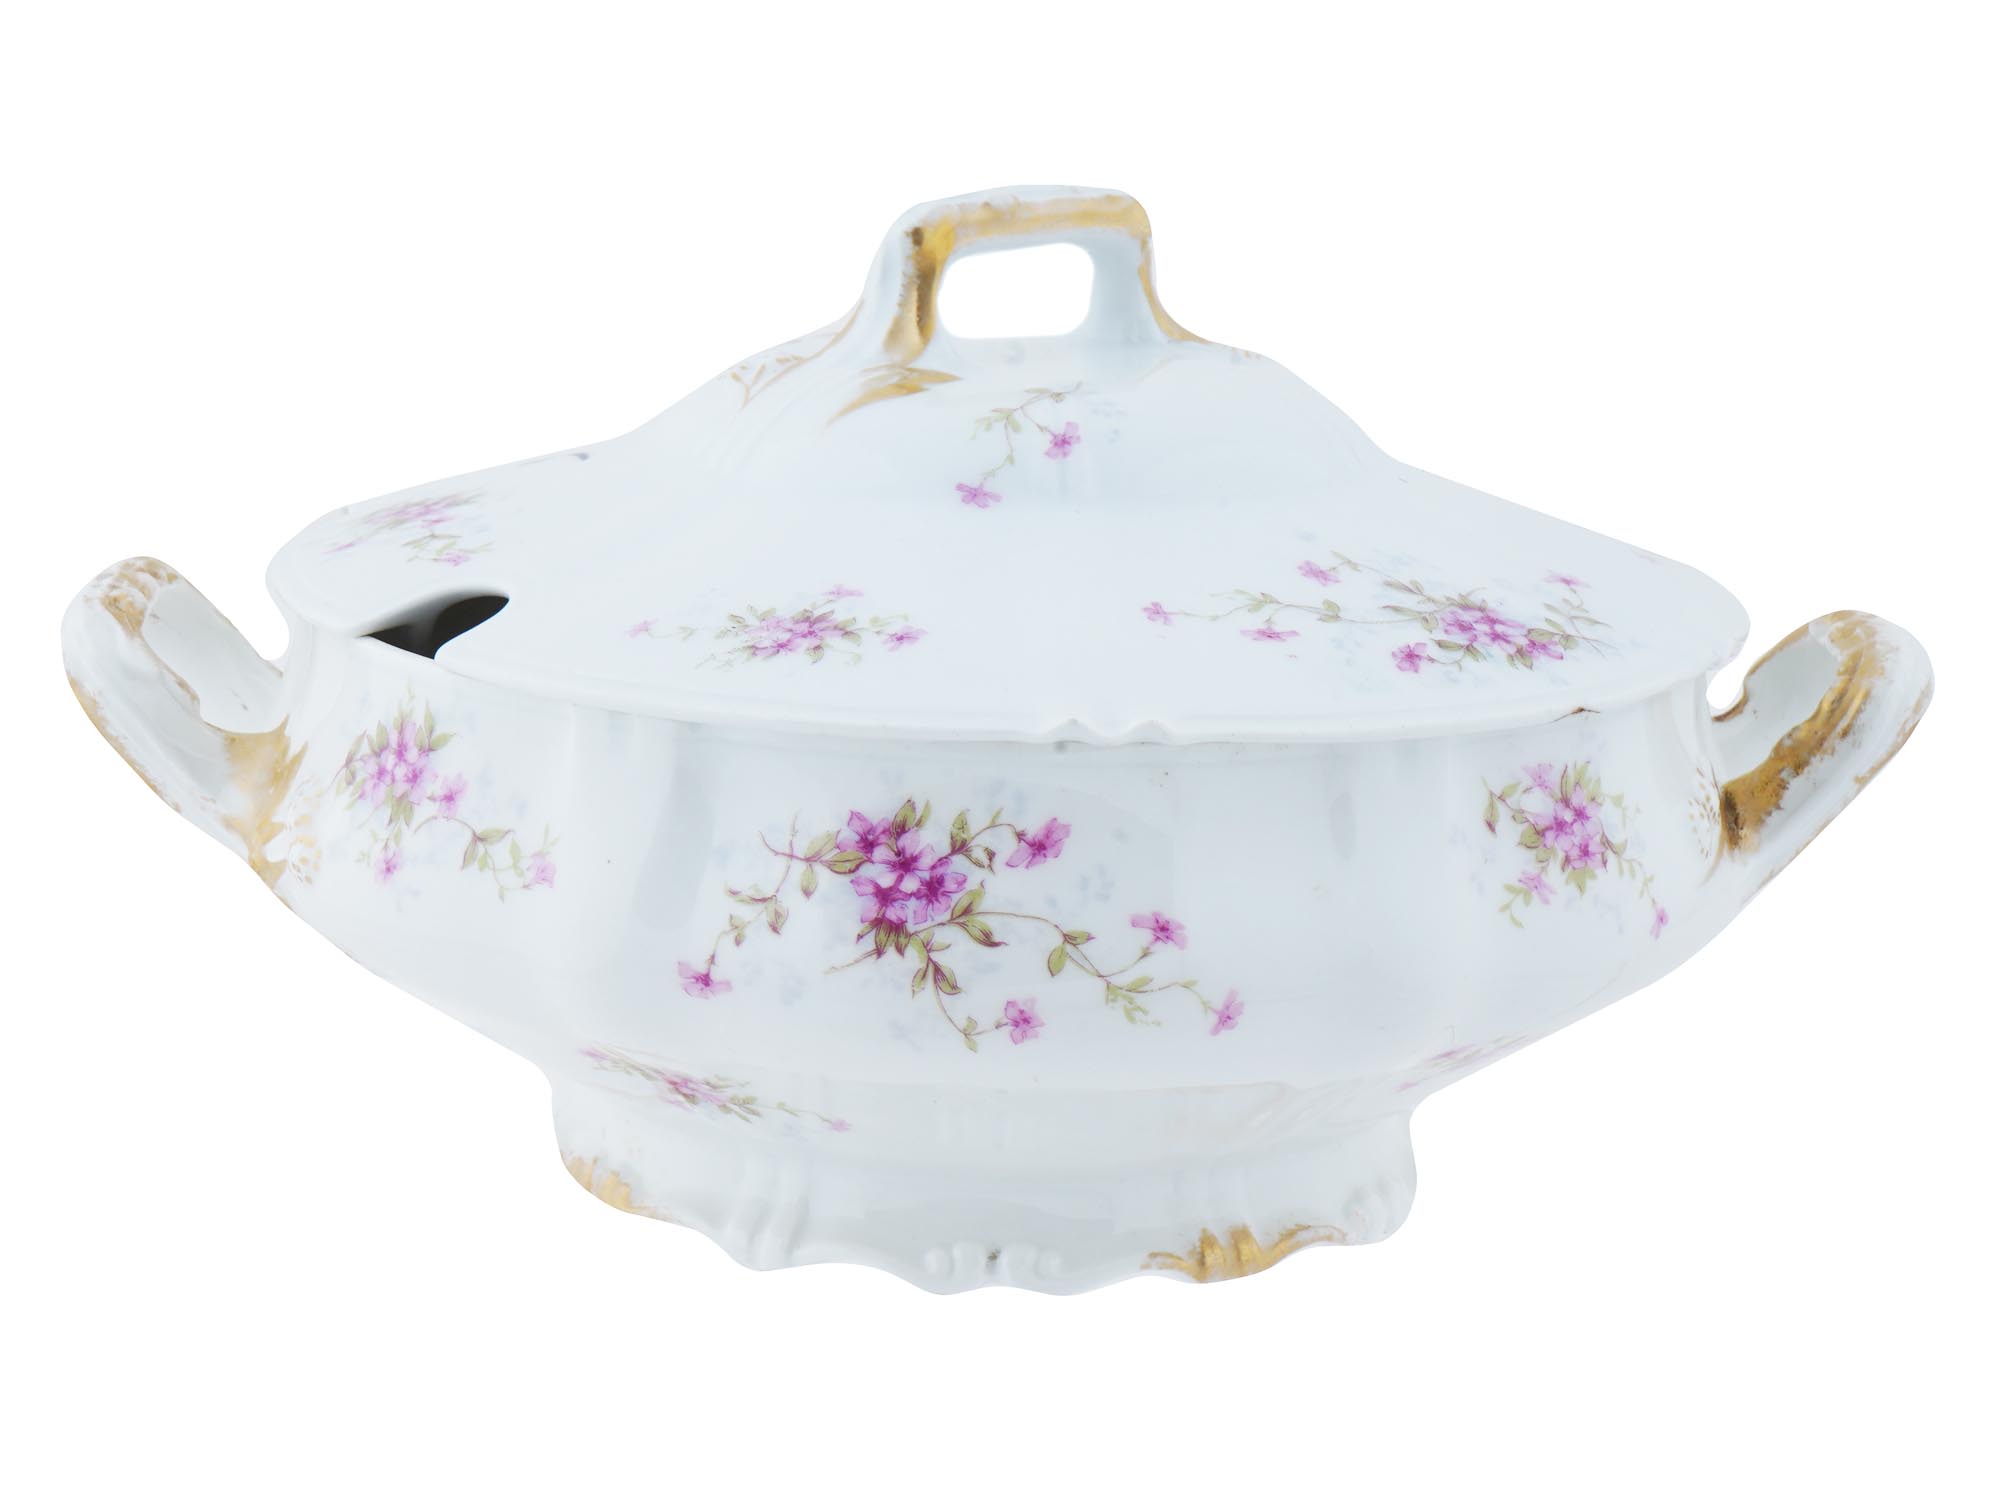 FRENCH LIMOGES THEODORE HAVILAND PORCELAIN TUREEN PIC-0